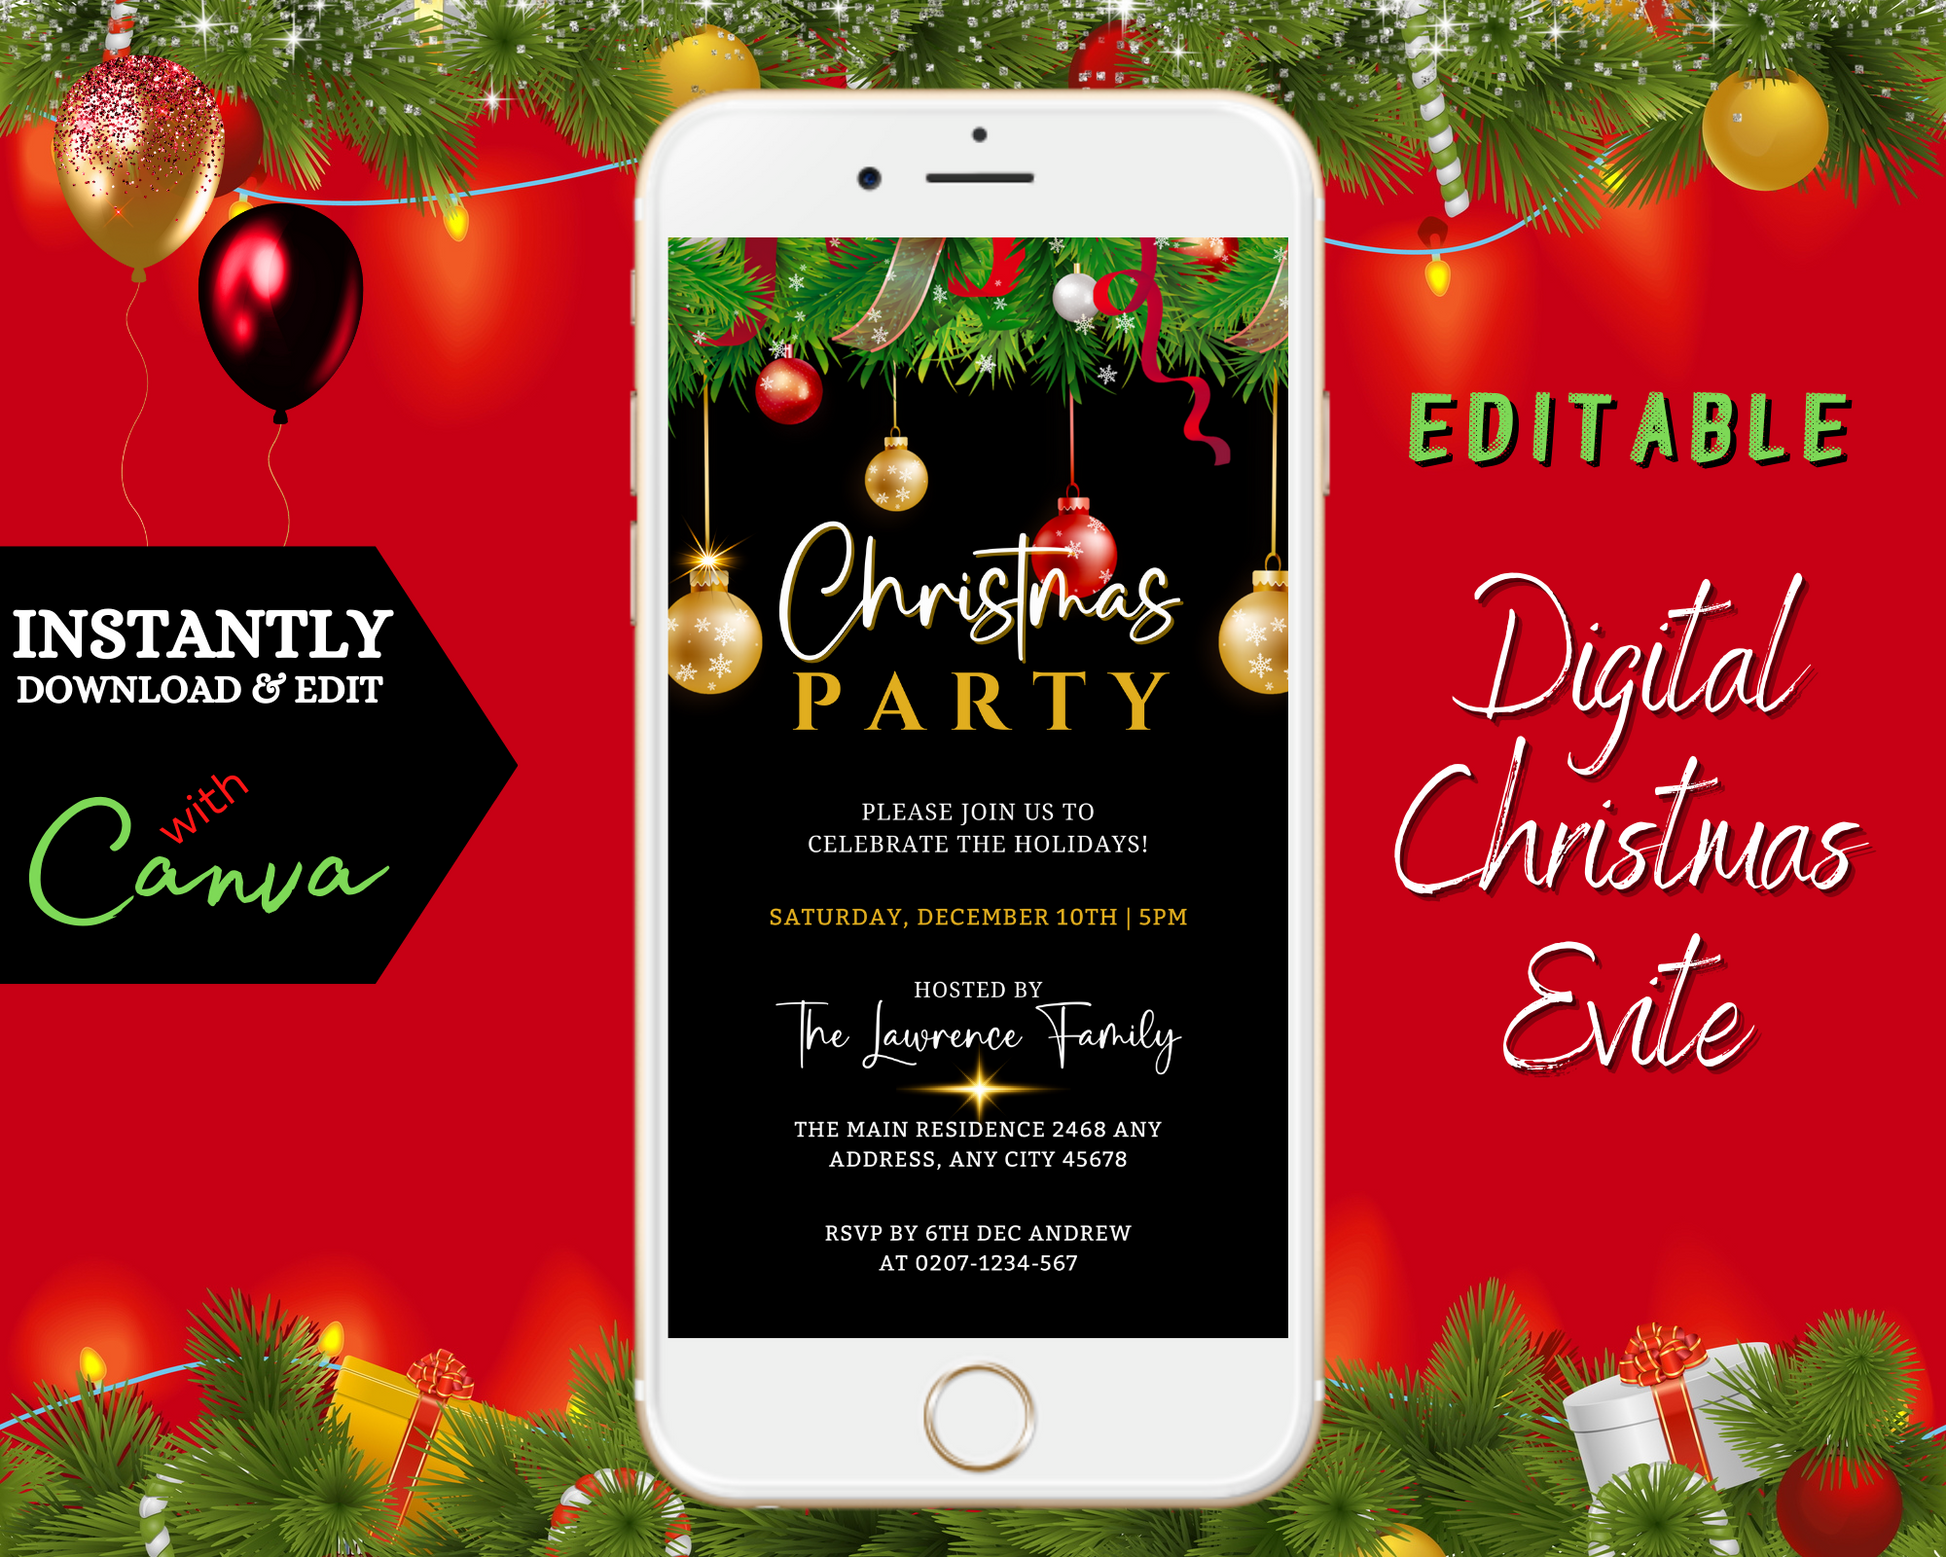 White smartphone displaying a customizable Christmas party invitation template with red, gold, and green leaf design, set against a festive red background.